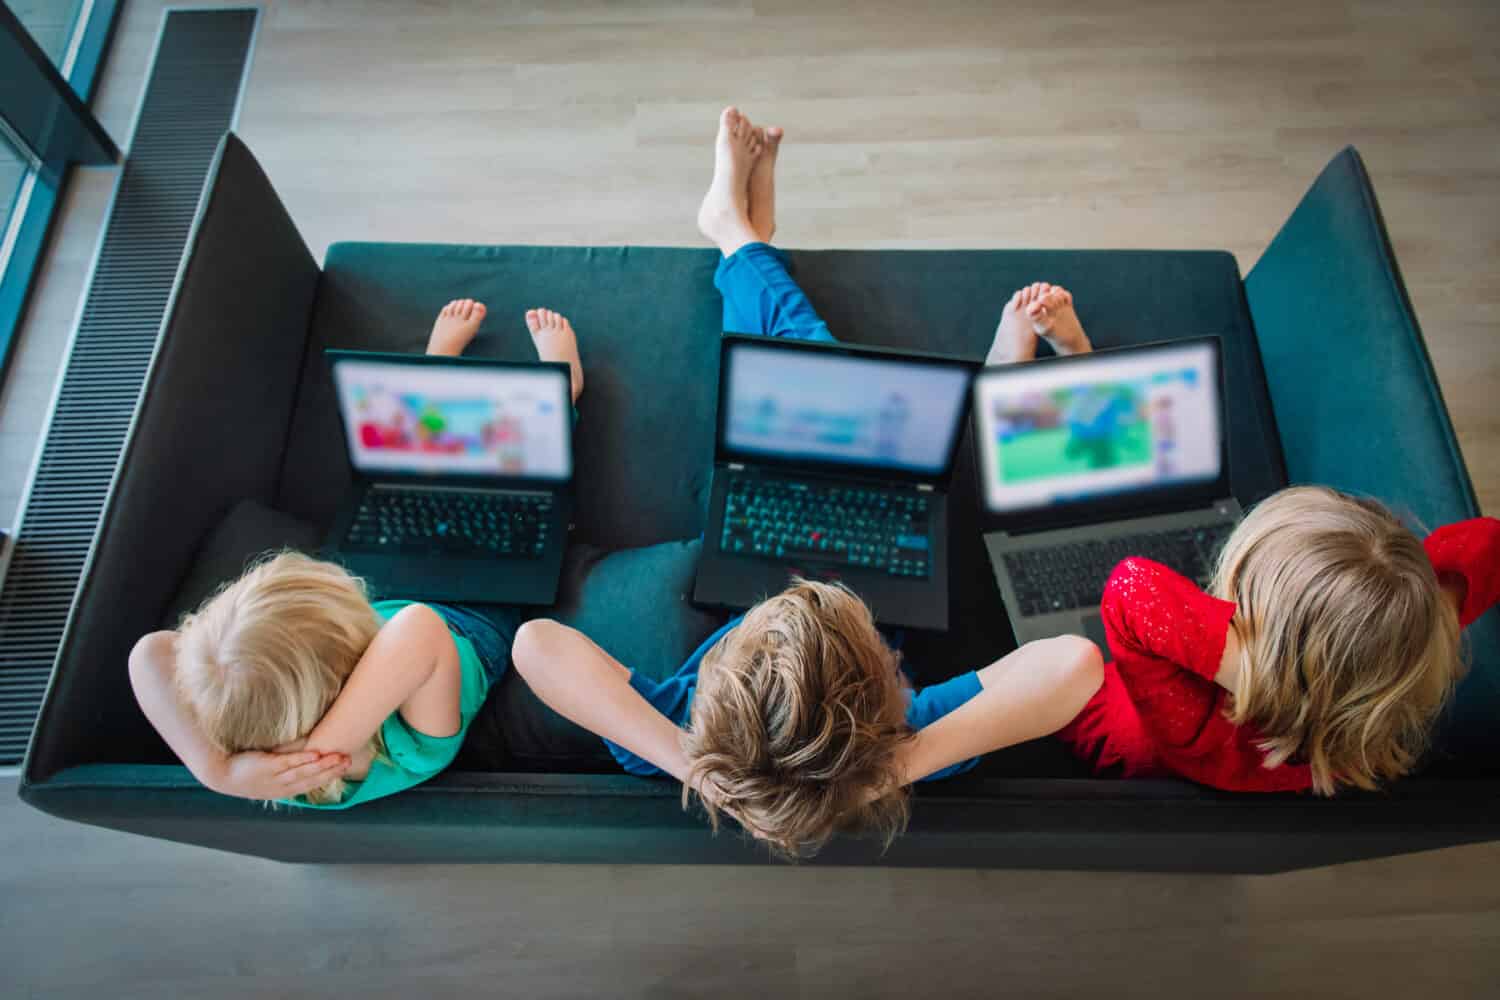 kids looking at laptop while staying home, family on qurantine